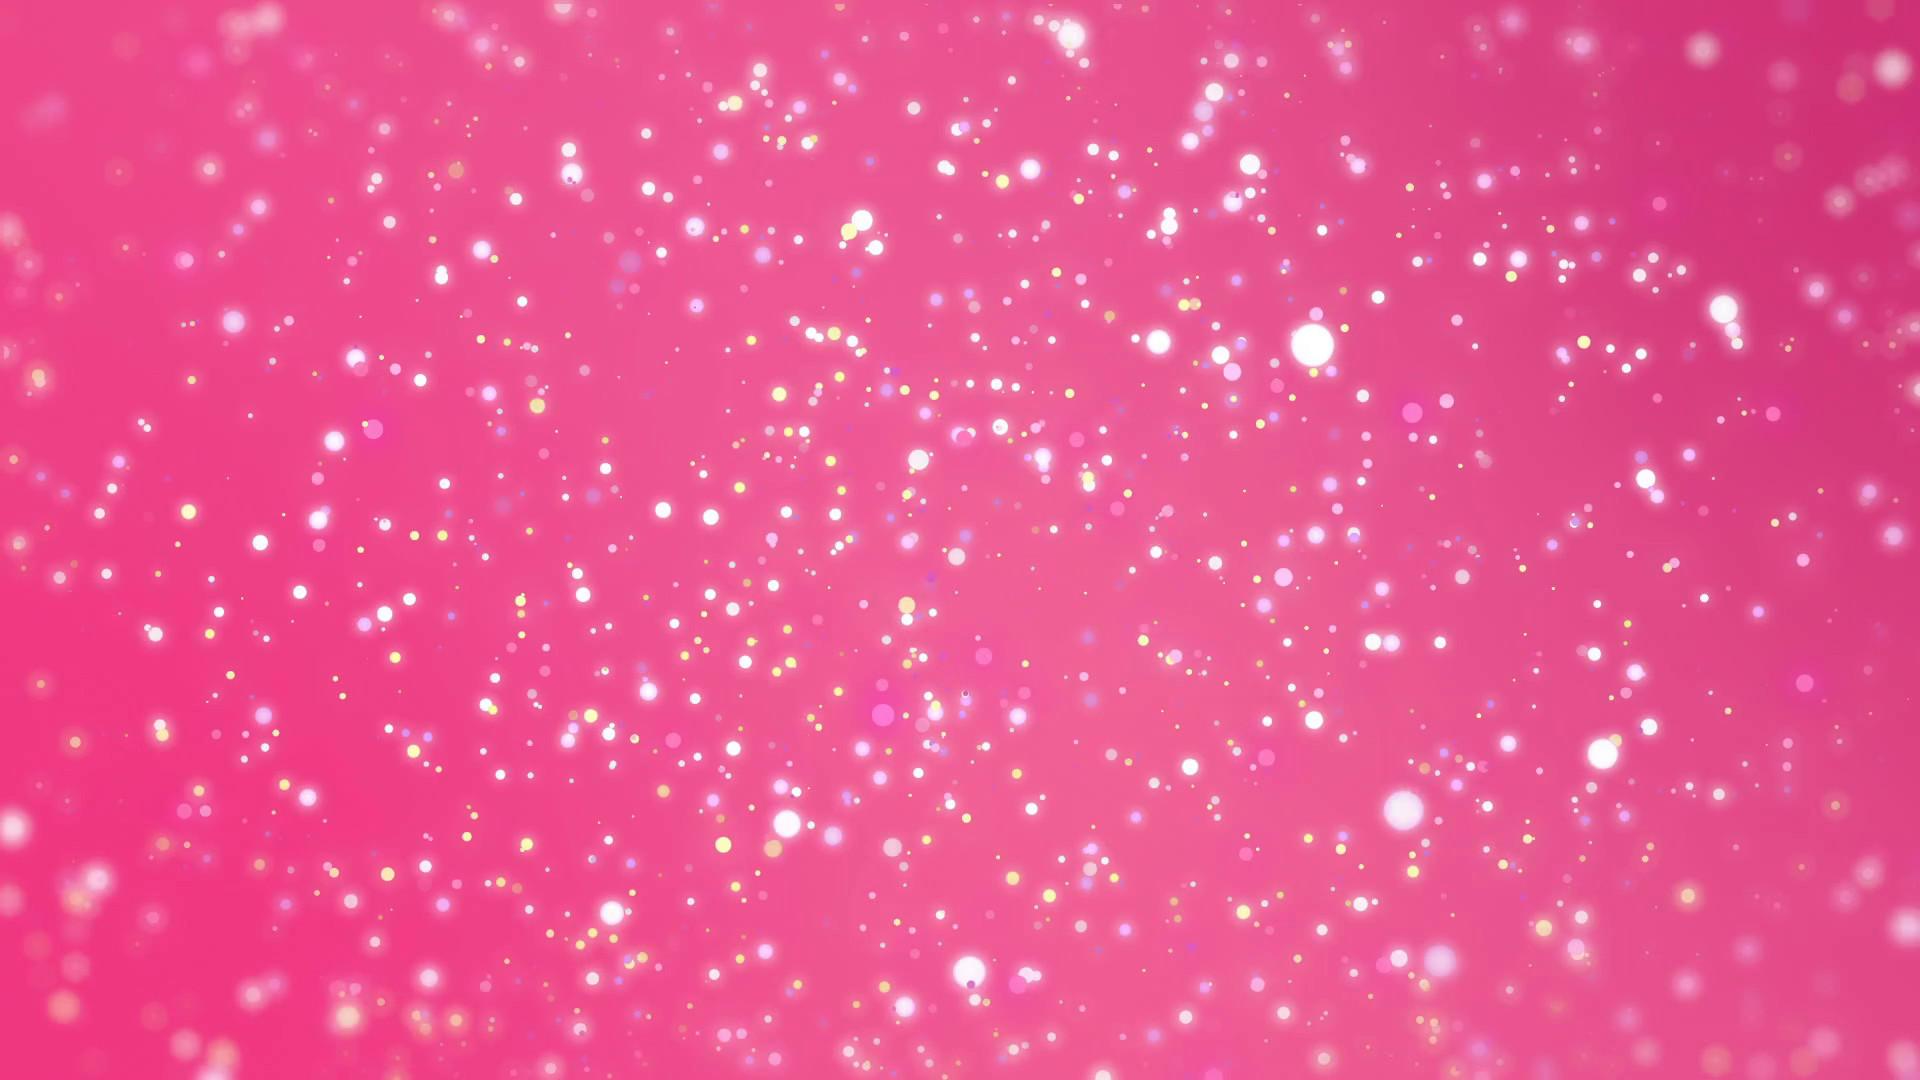 1920x1080 Valentines Day romantic dreamy pink glitter background with sparkling  colourful particles and blurred edges Motion Background - Storyblocks Video